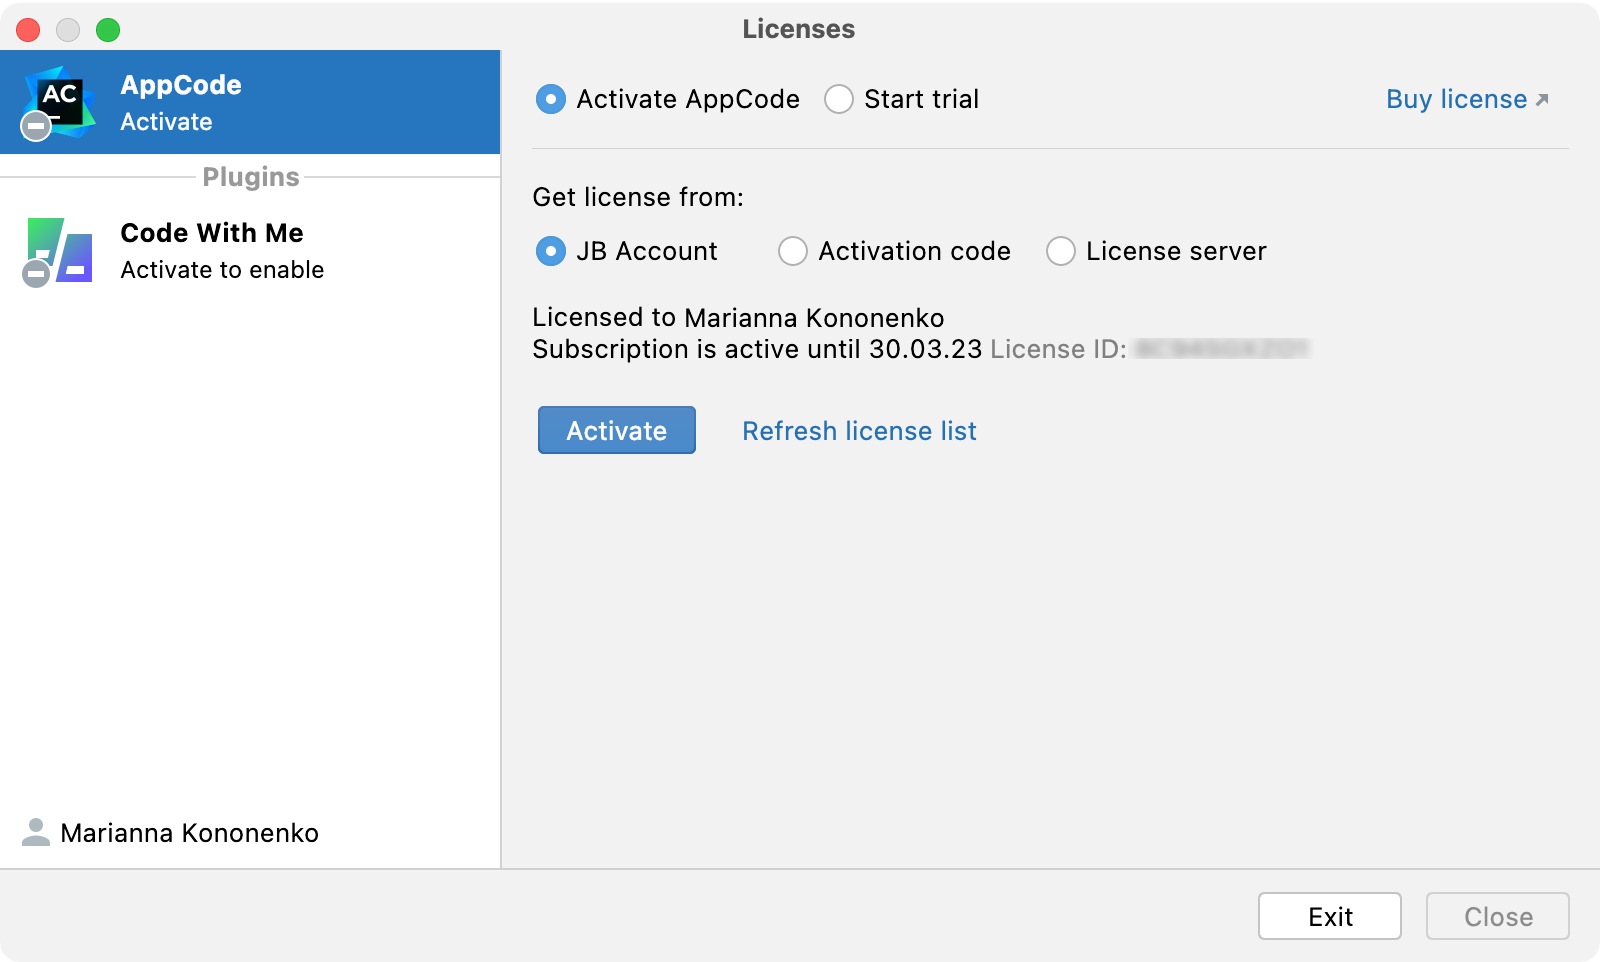 Activate AppCode license with a JB Account